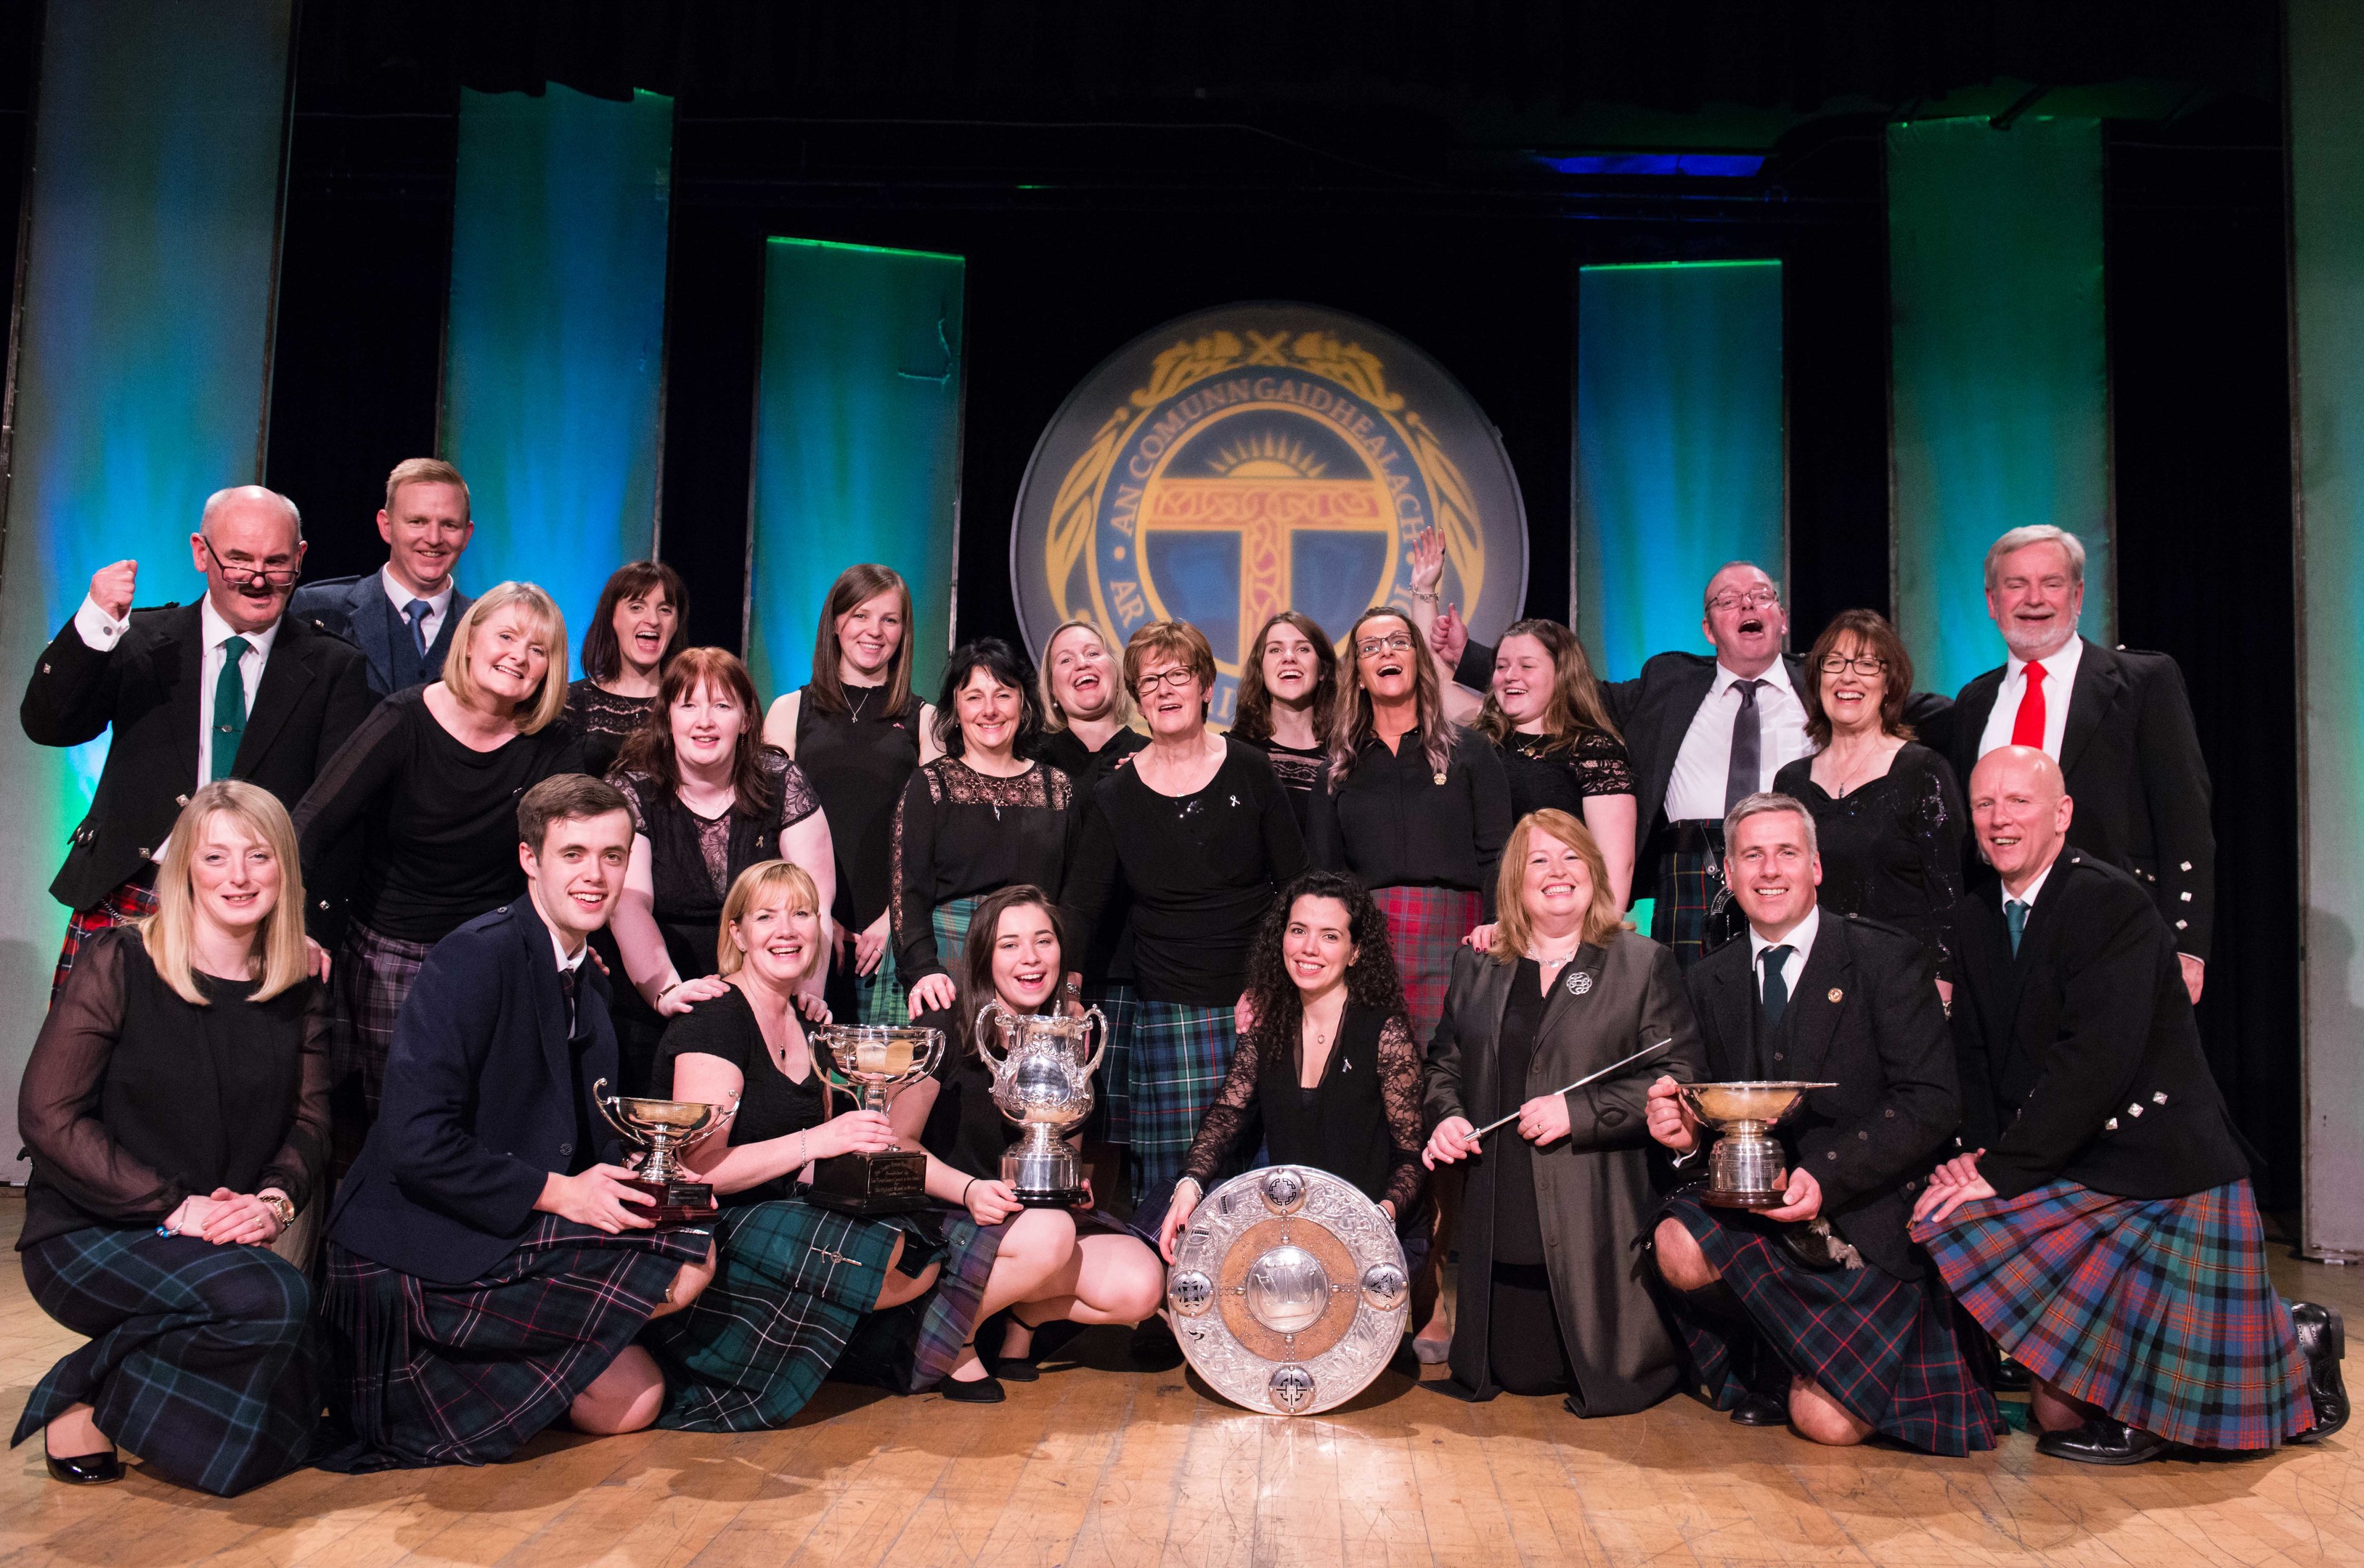 The choir from Back on Lewis were awarded the Lorn Shield after sparkling Mod performances.